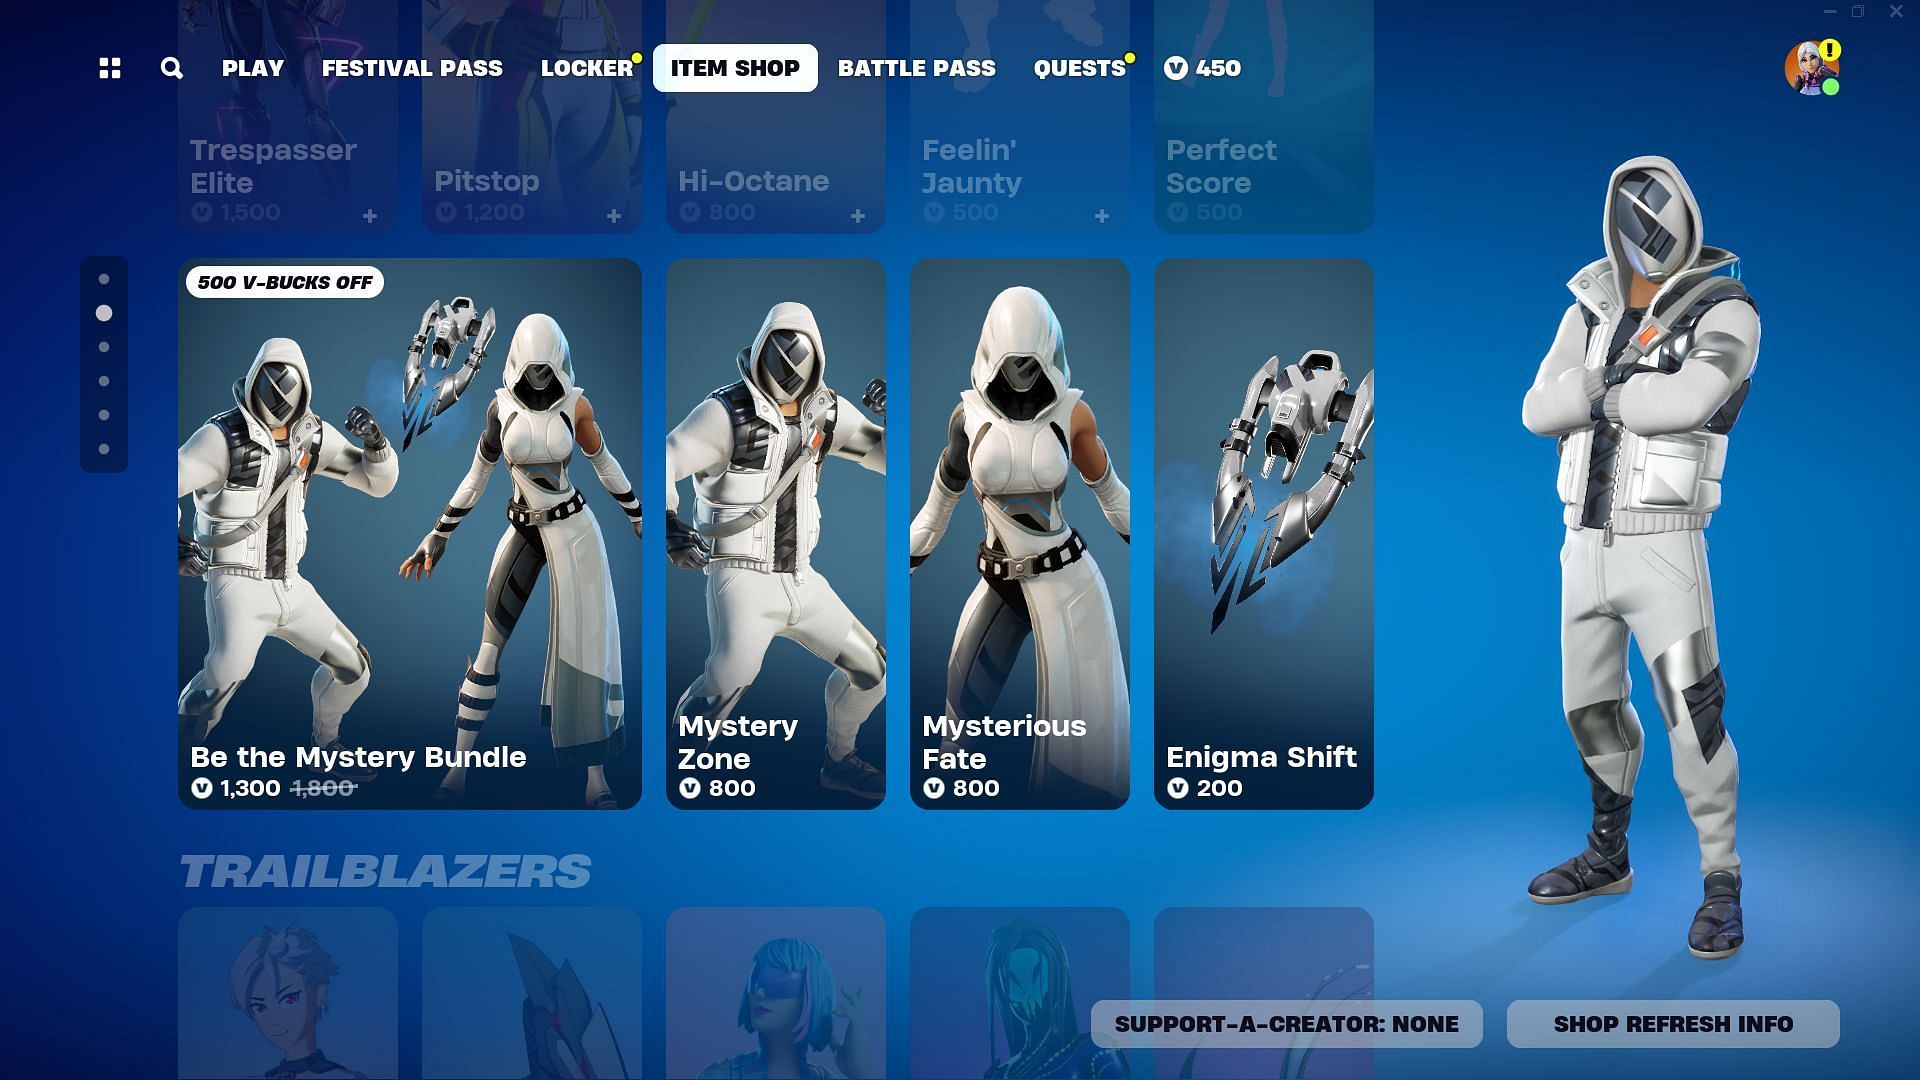 Be The Mystery Bundle is listed in the Item Shop (Image via Epic Games/Fortnite)